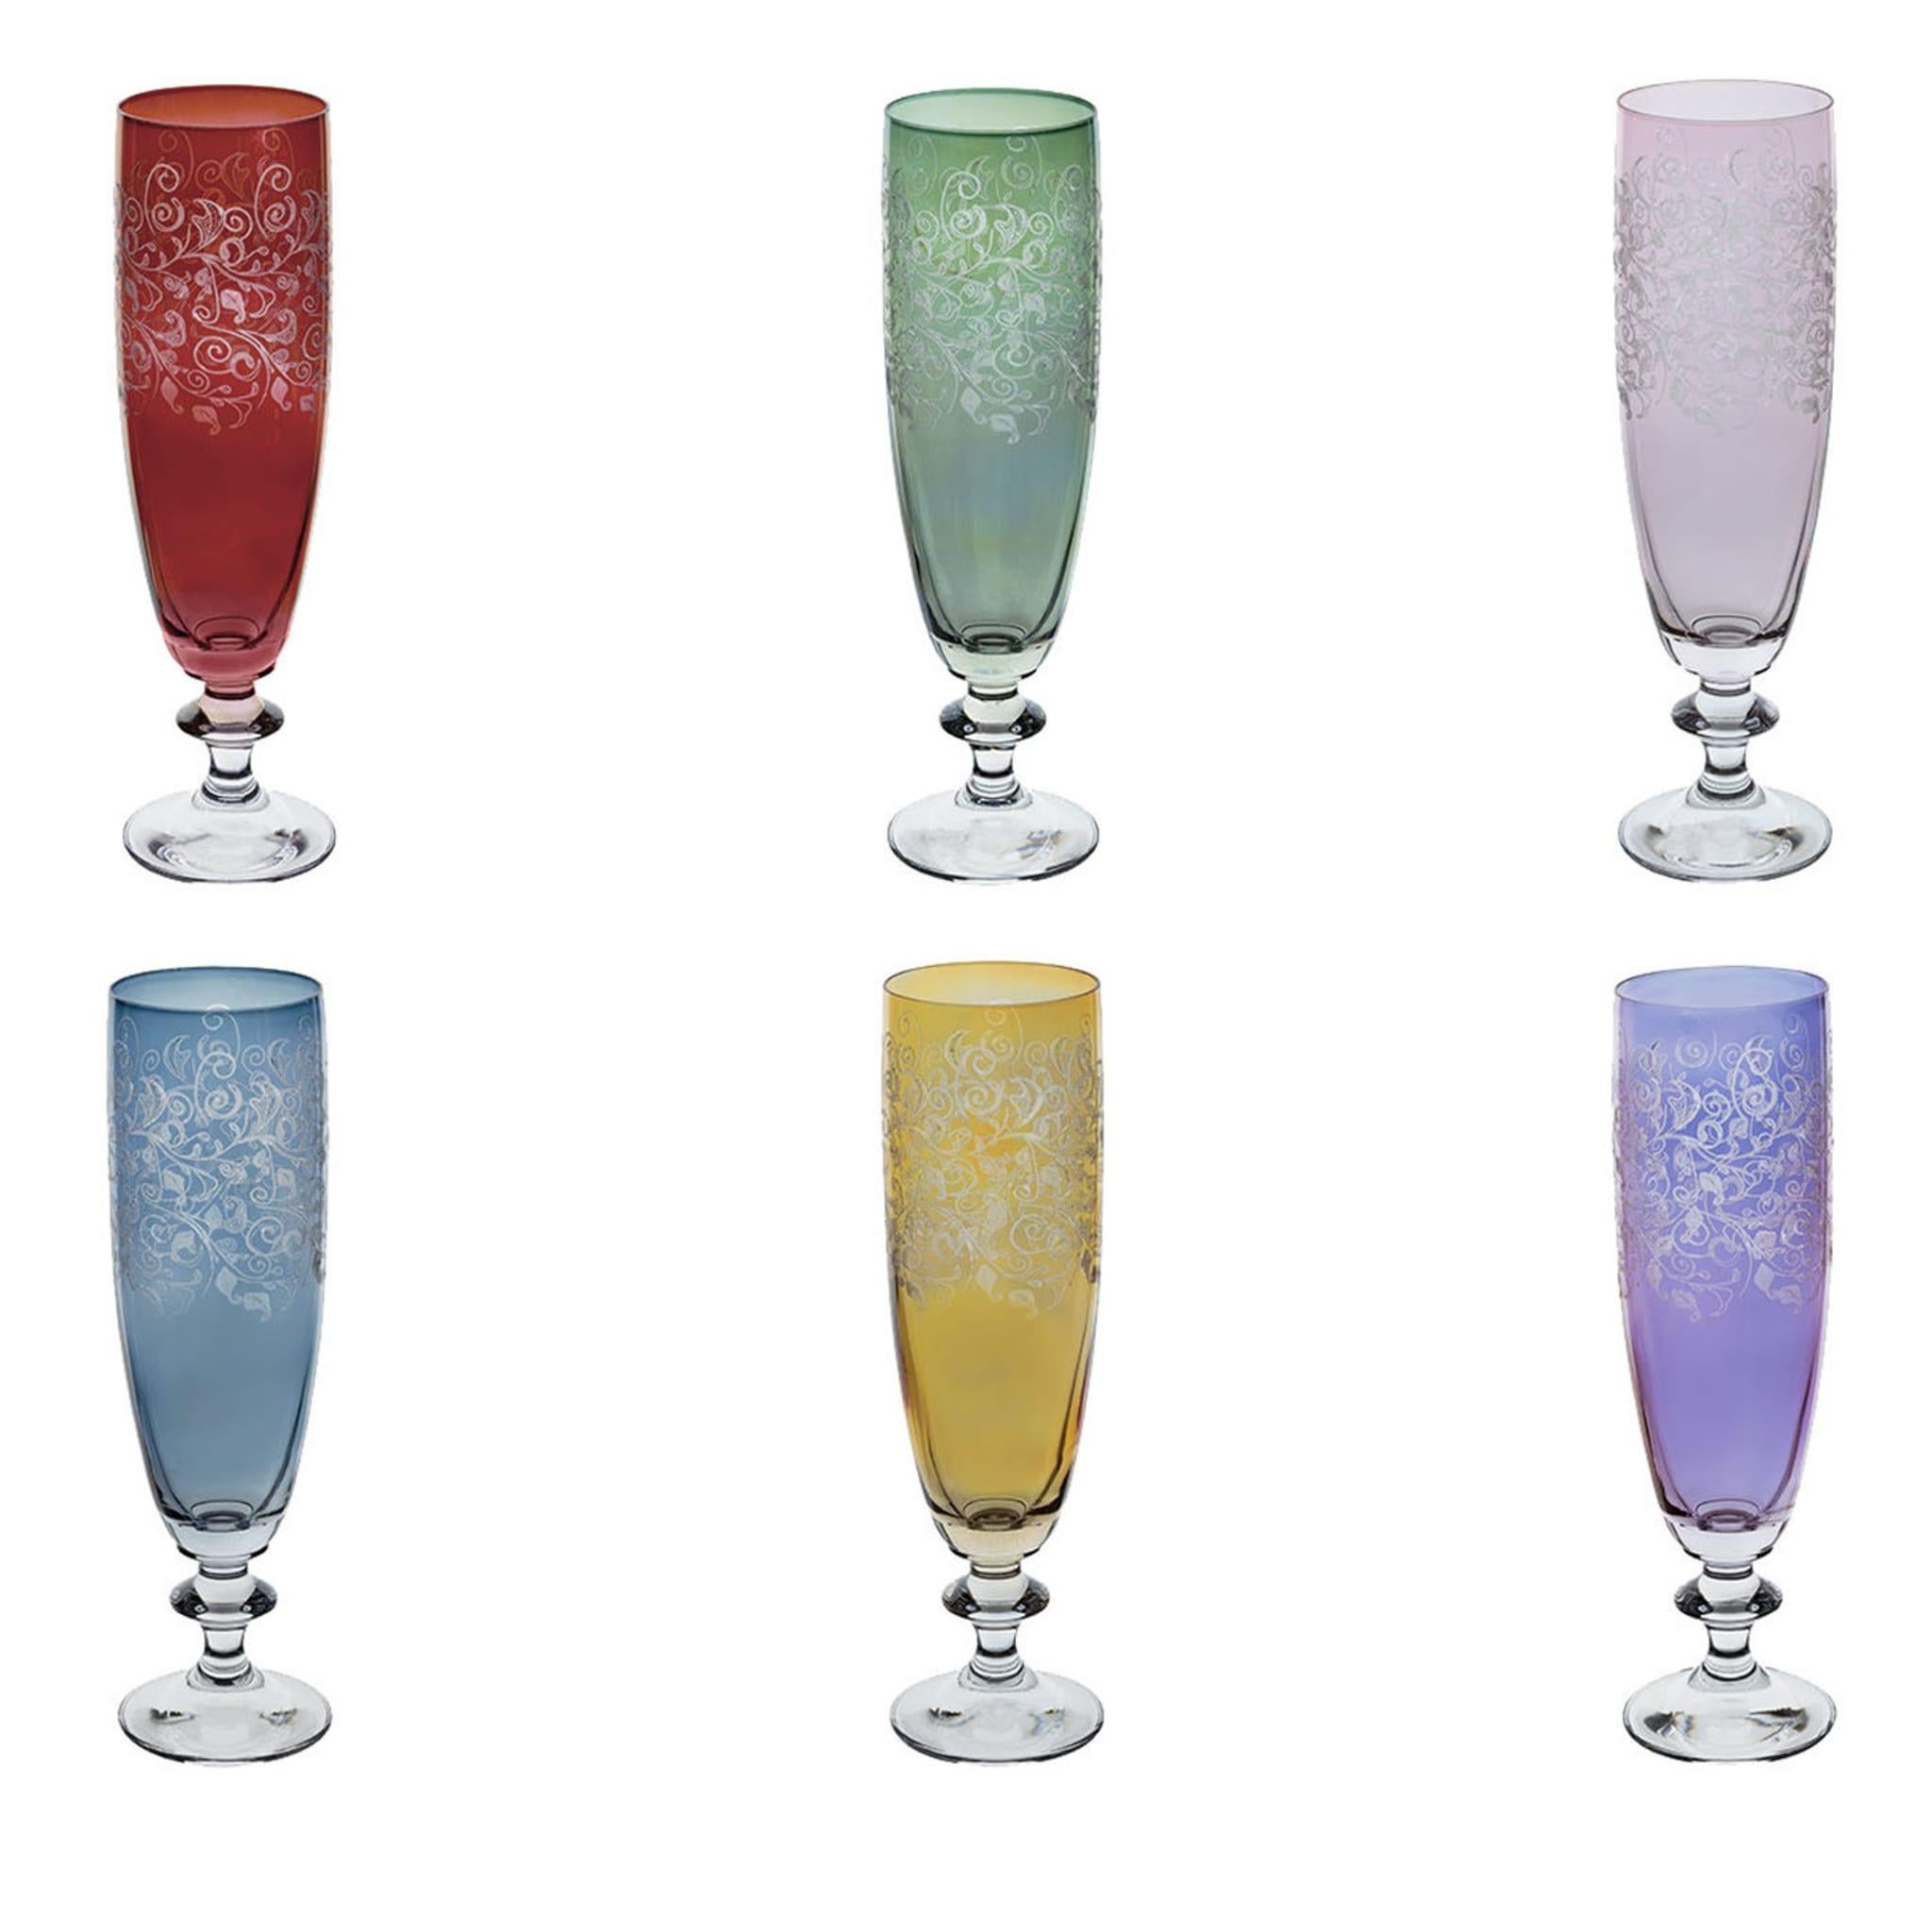 These six flutes are part of a set in the Ravel collection, which features mouth-blown glass pieces that are splendidly colored and etched with a floral motif that adds elegance and charm to each object. A precious addition to any cabinet bar or